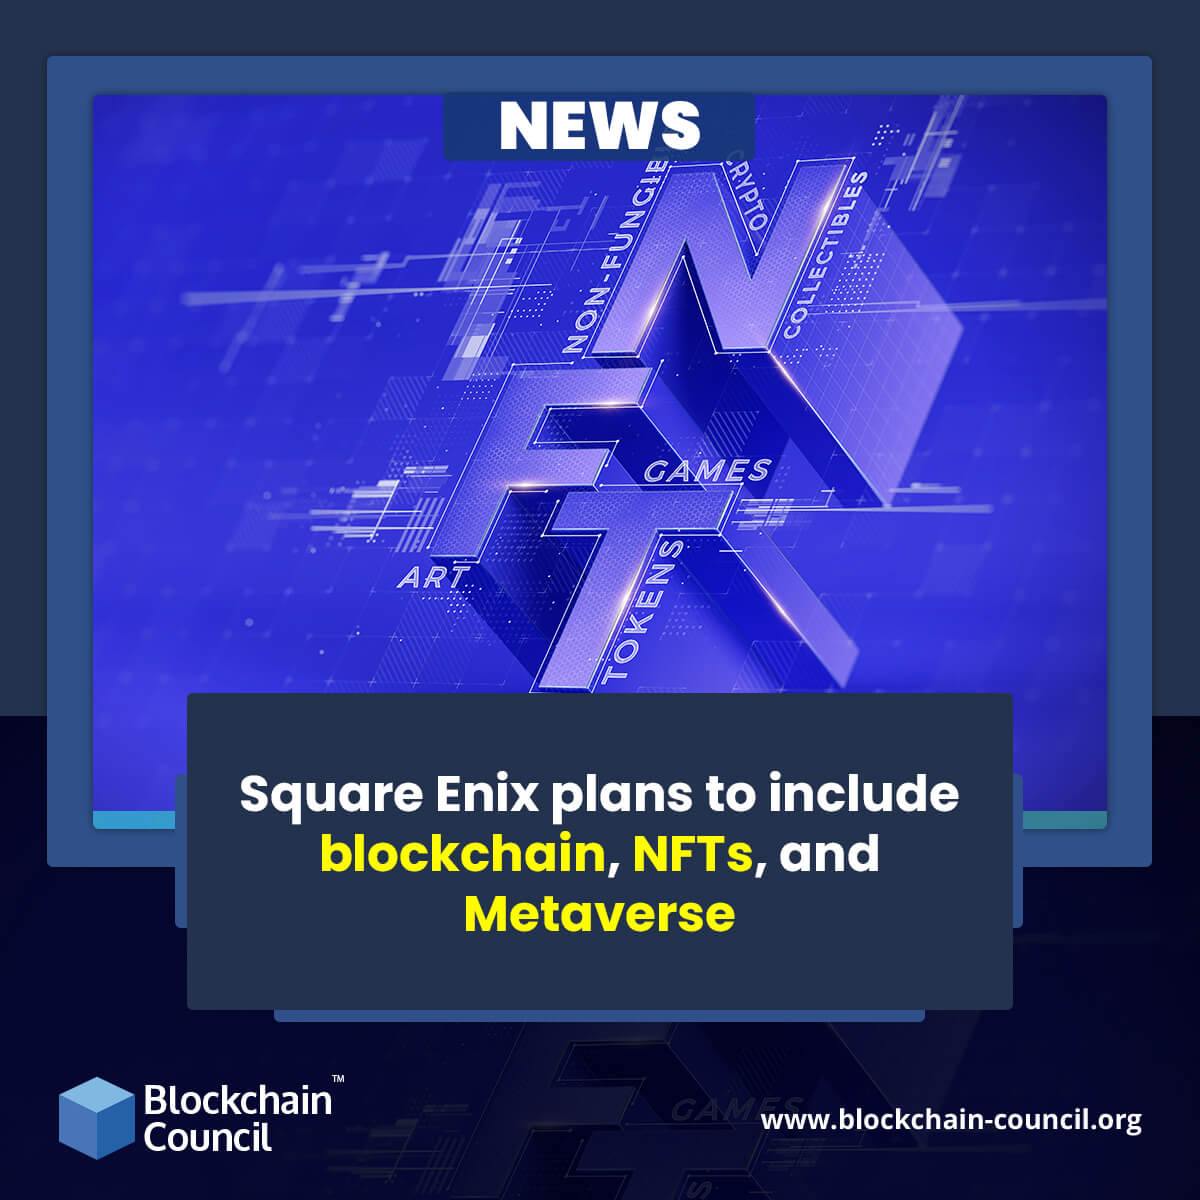 Square Enix plans to include blockchain, NFTs, and Metaverse